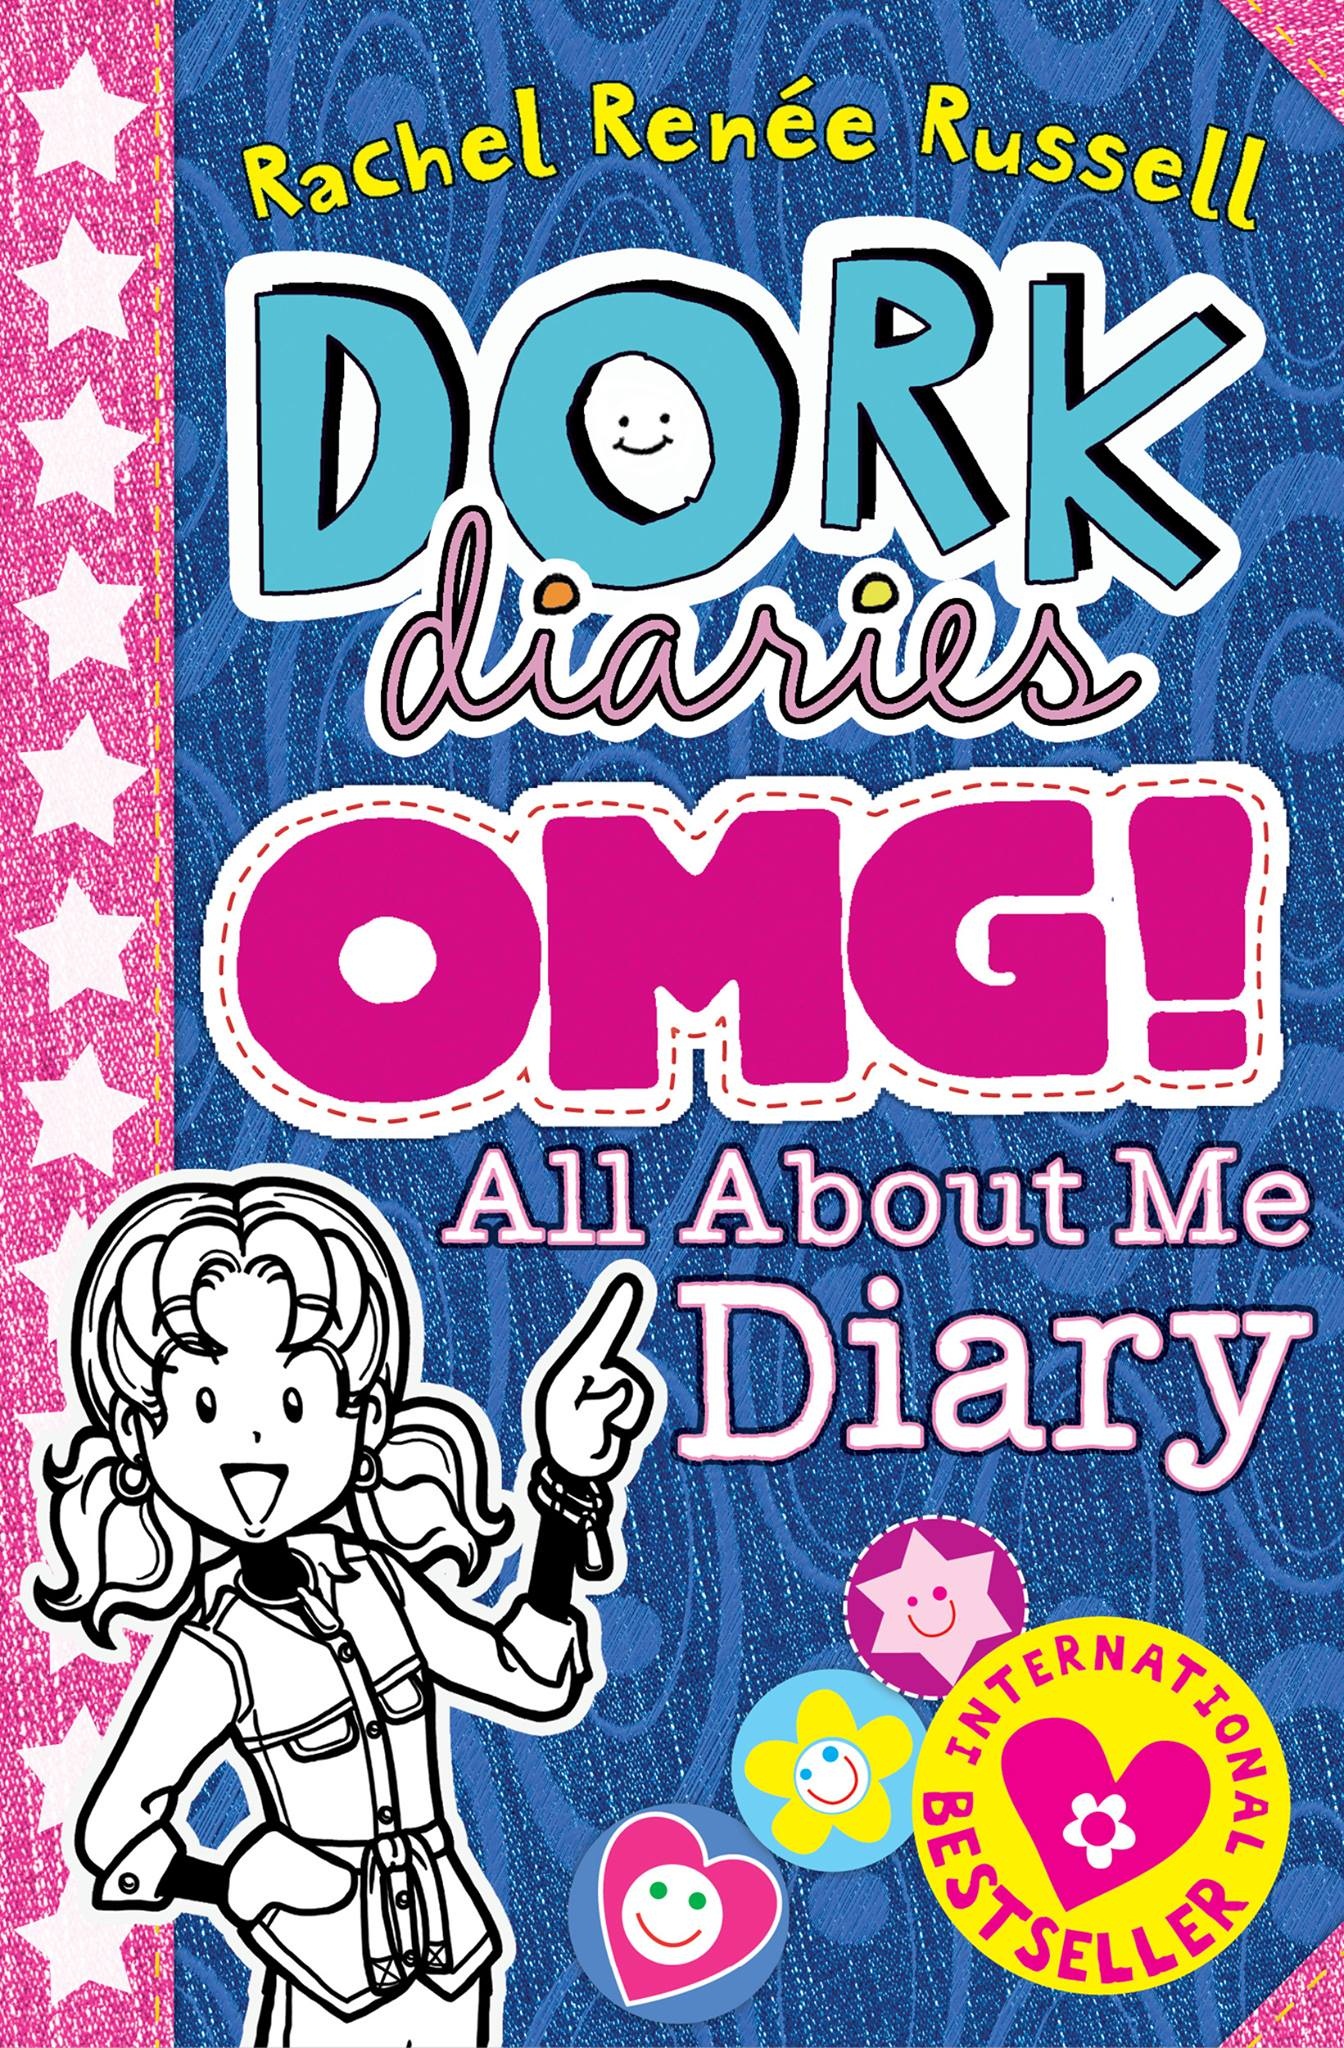 Dork Diaries: OMG! All About Me Diary! | The Dork Diaries Wiki | Fandom powered by Wikia